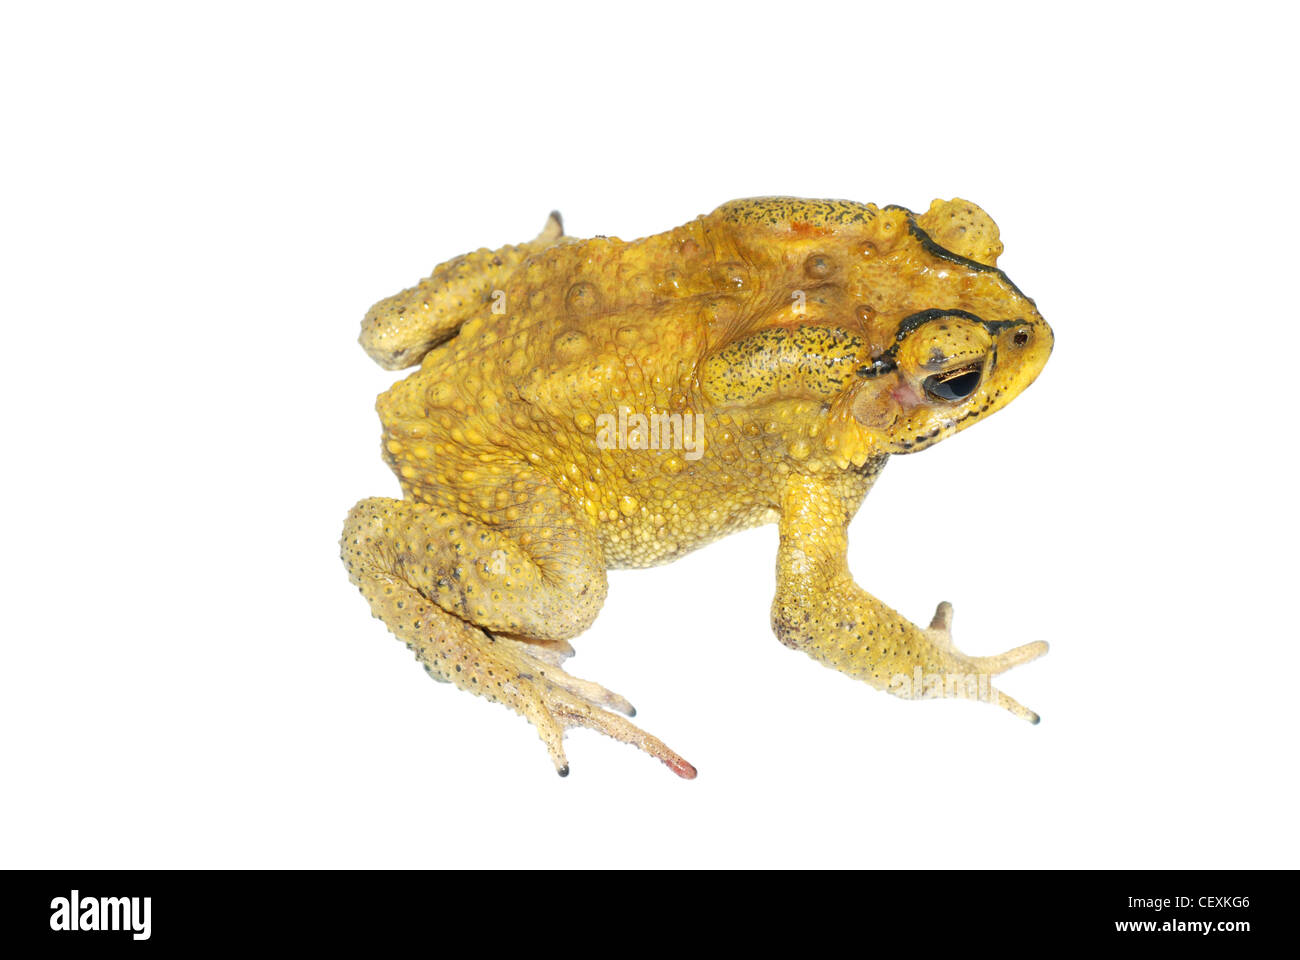 Golden toad isolated in white. Stock Photo